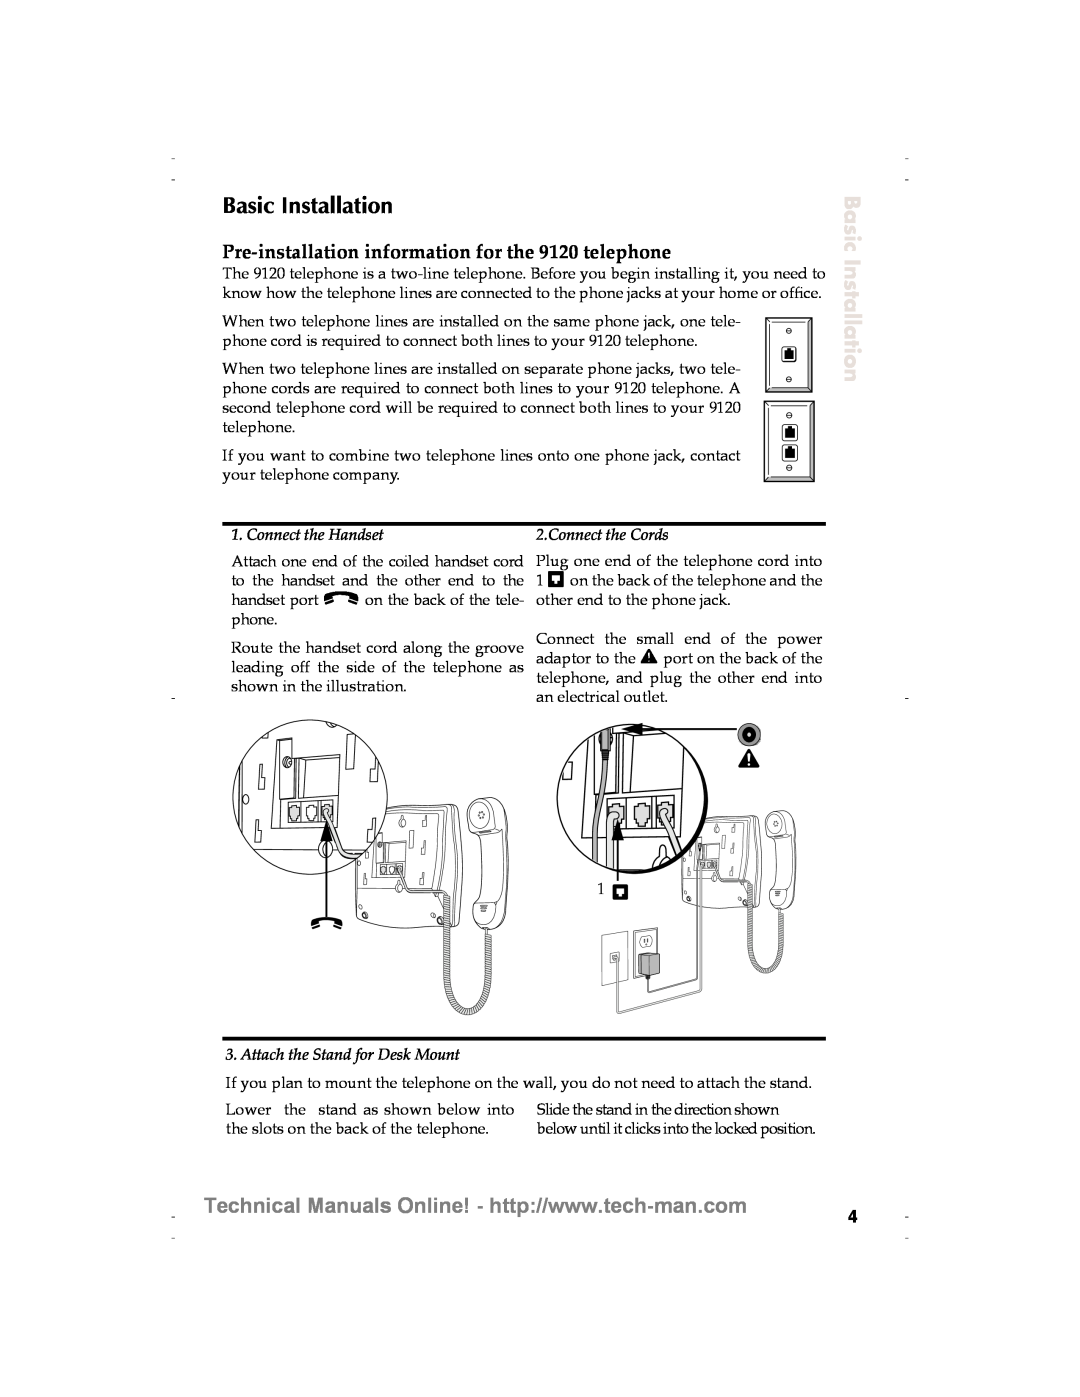 Aastra Telecom technical manual Basic Installation, Pre-installation information for the 9120 telephone 